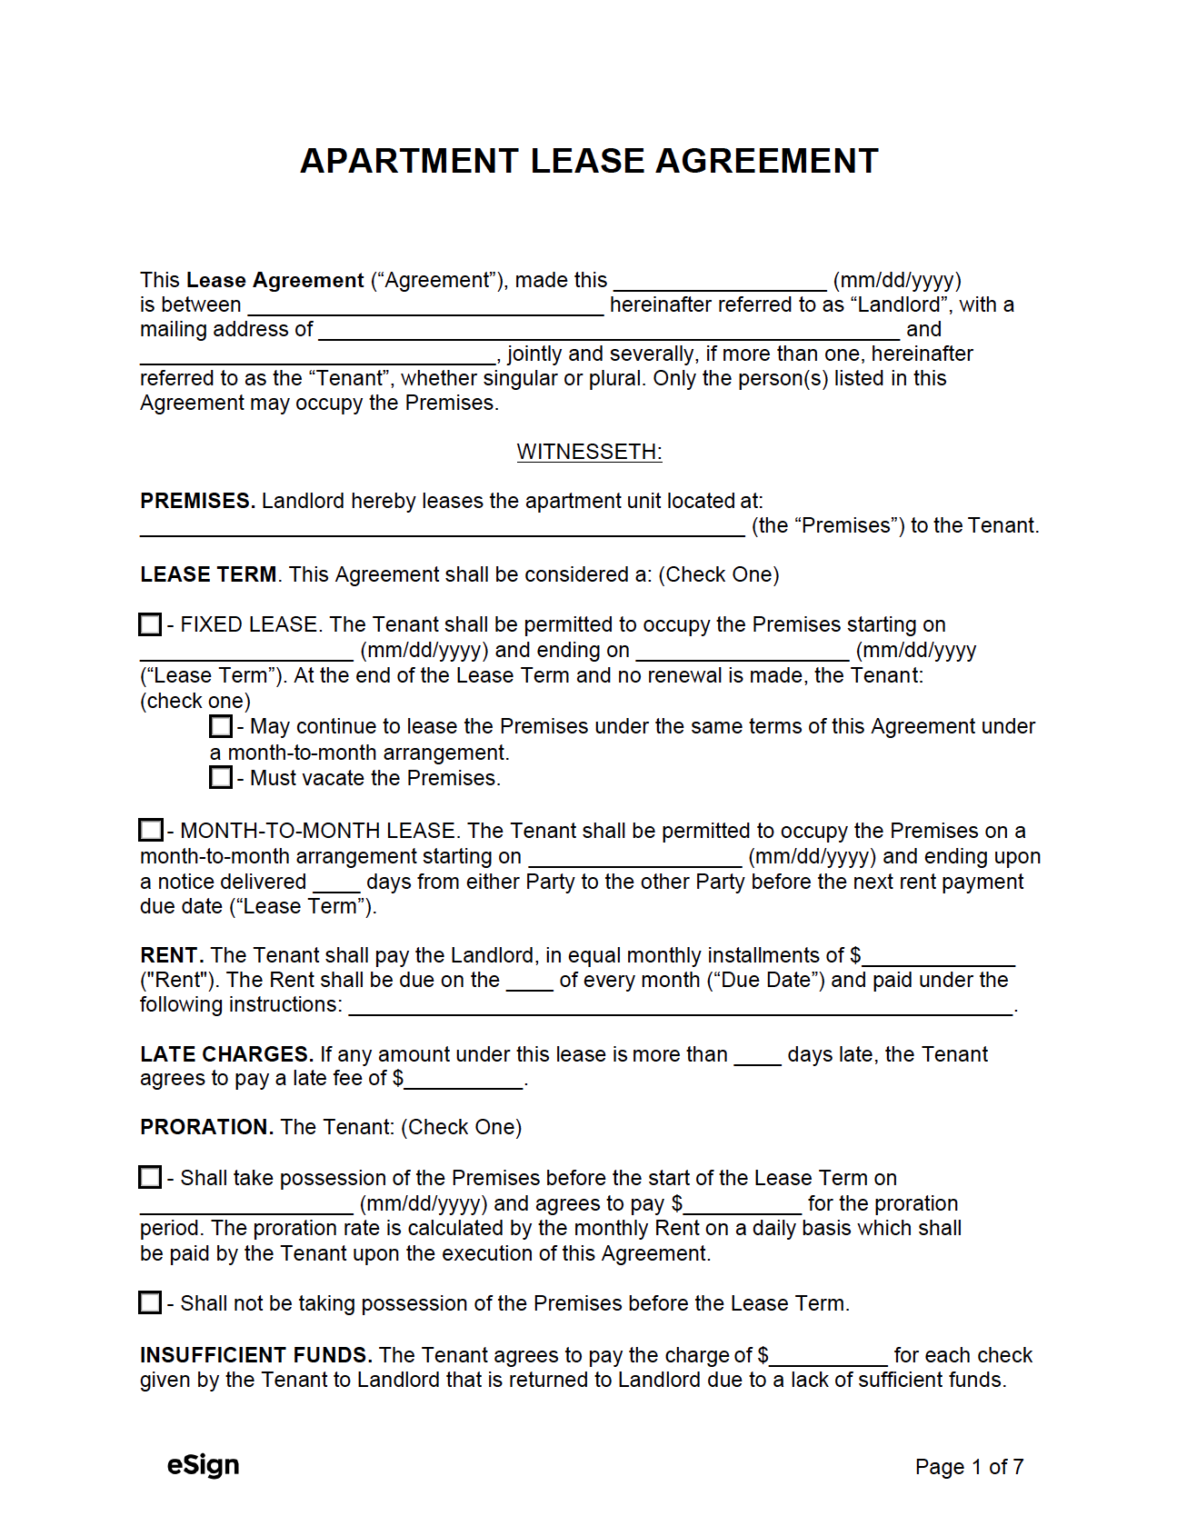 free-standard-residential-lease-agreement-template-pdf-word